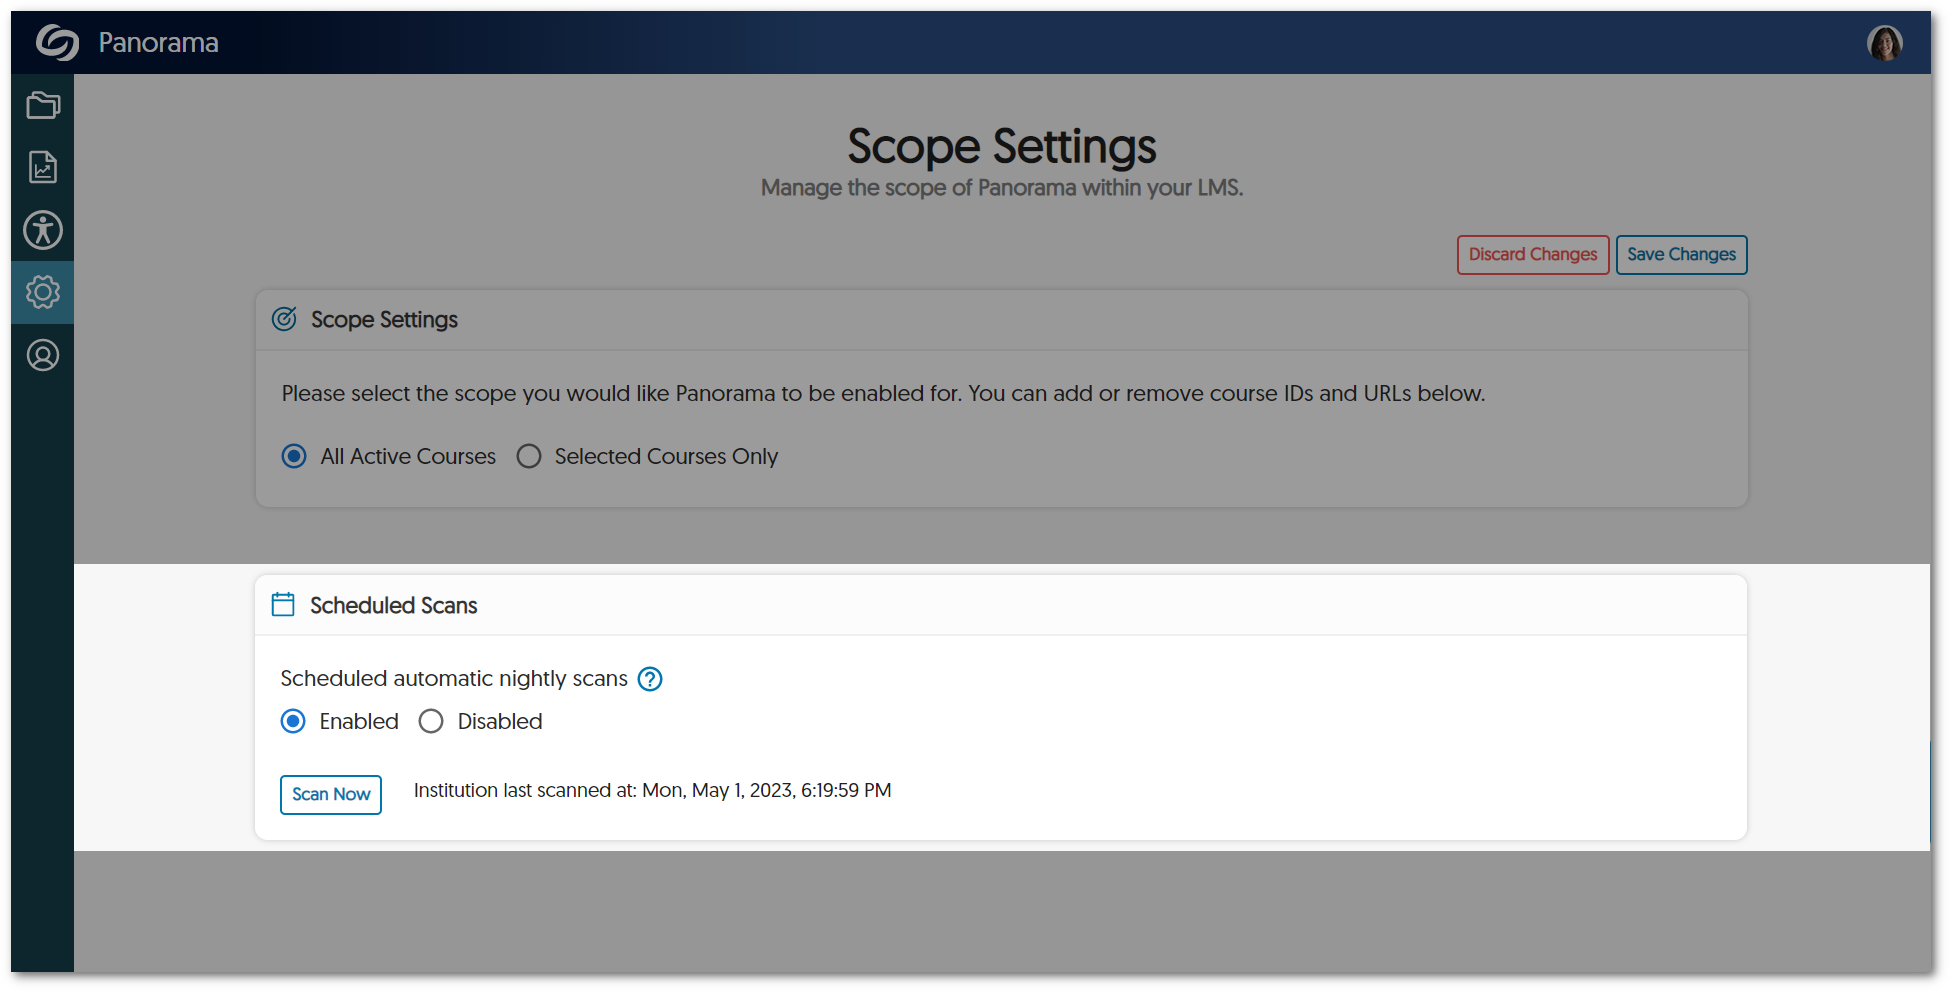 New Scope settings page features a panel for Schedules Scans. 